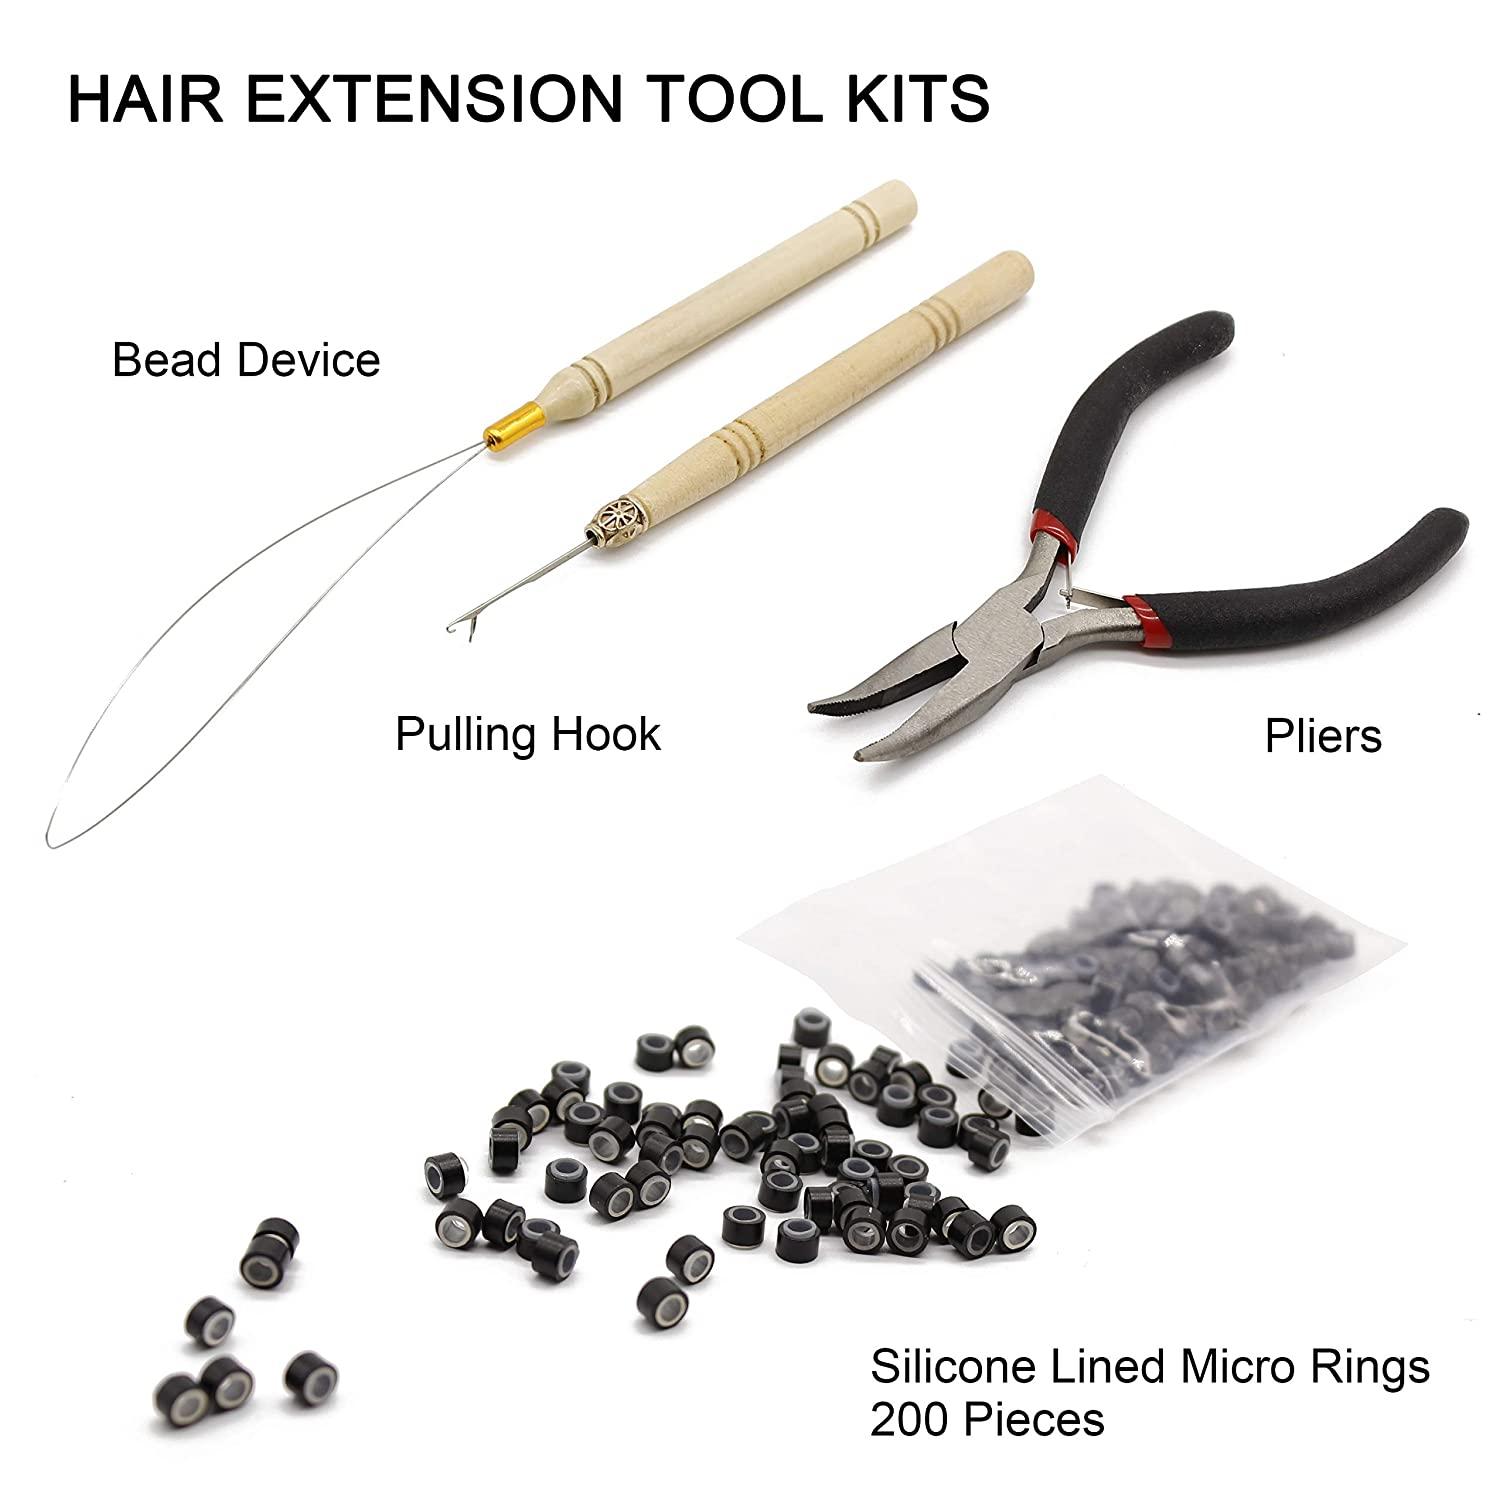 Professional Hair Extension Kit Plier Plus Pulling Hook Bead Device and  Loop Needle Tool Kits with 200 Pieces Silicone Lined Micro Rings, 10 Pcs  Feather Hair, 120 Strands Tinsel Hair (Light Brown)